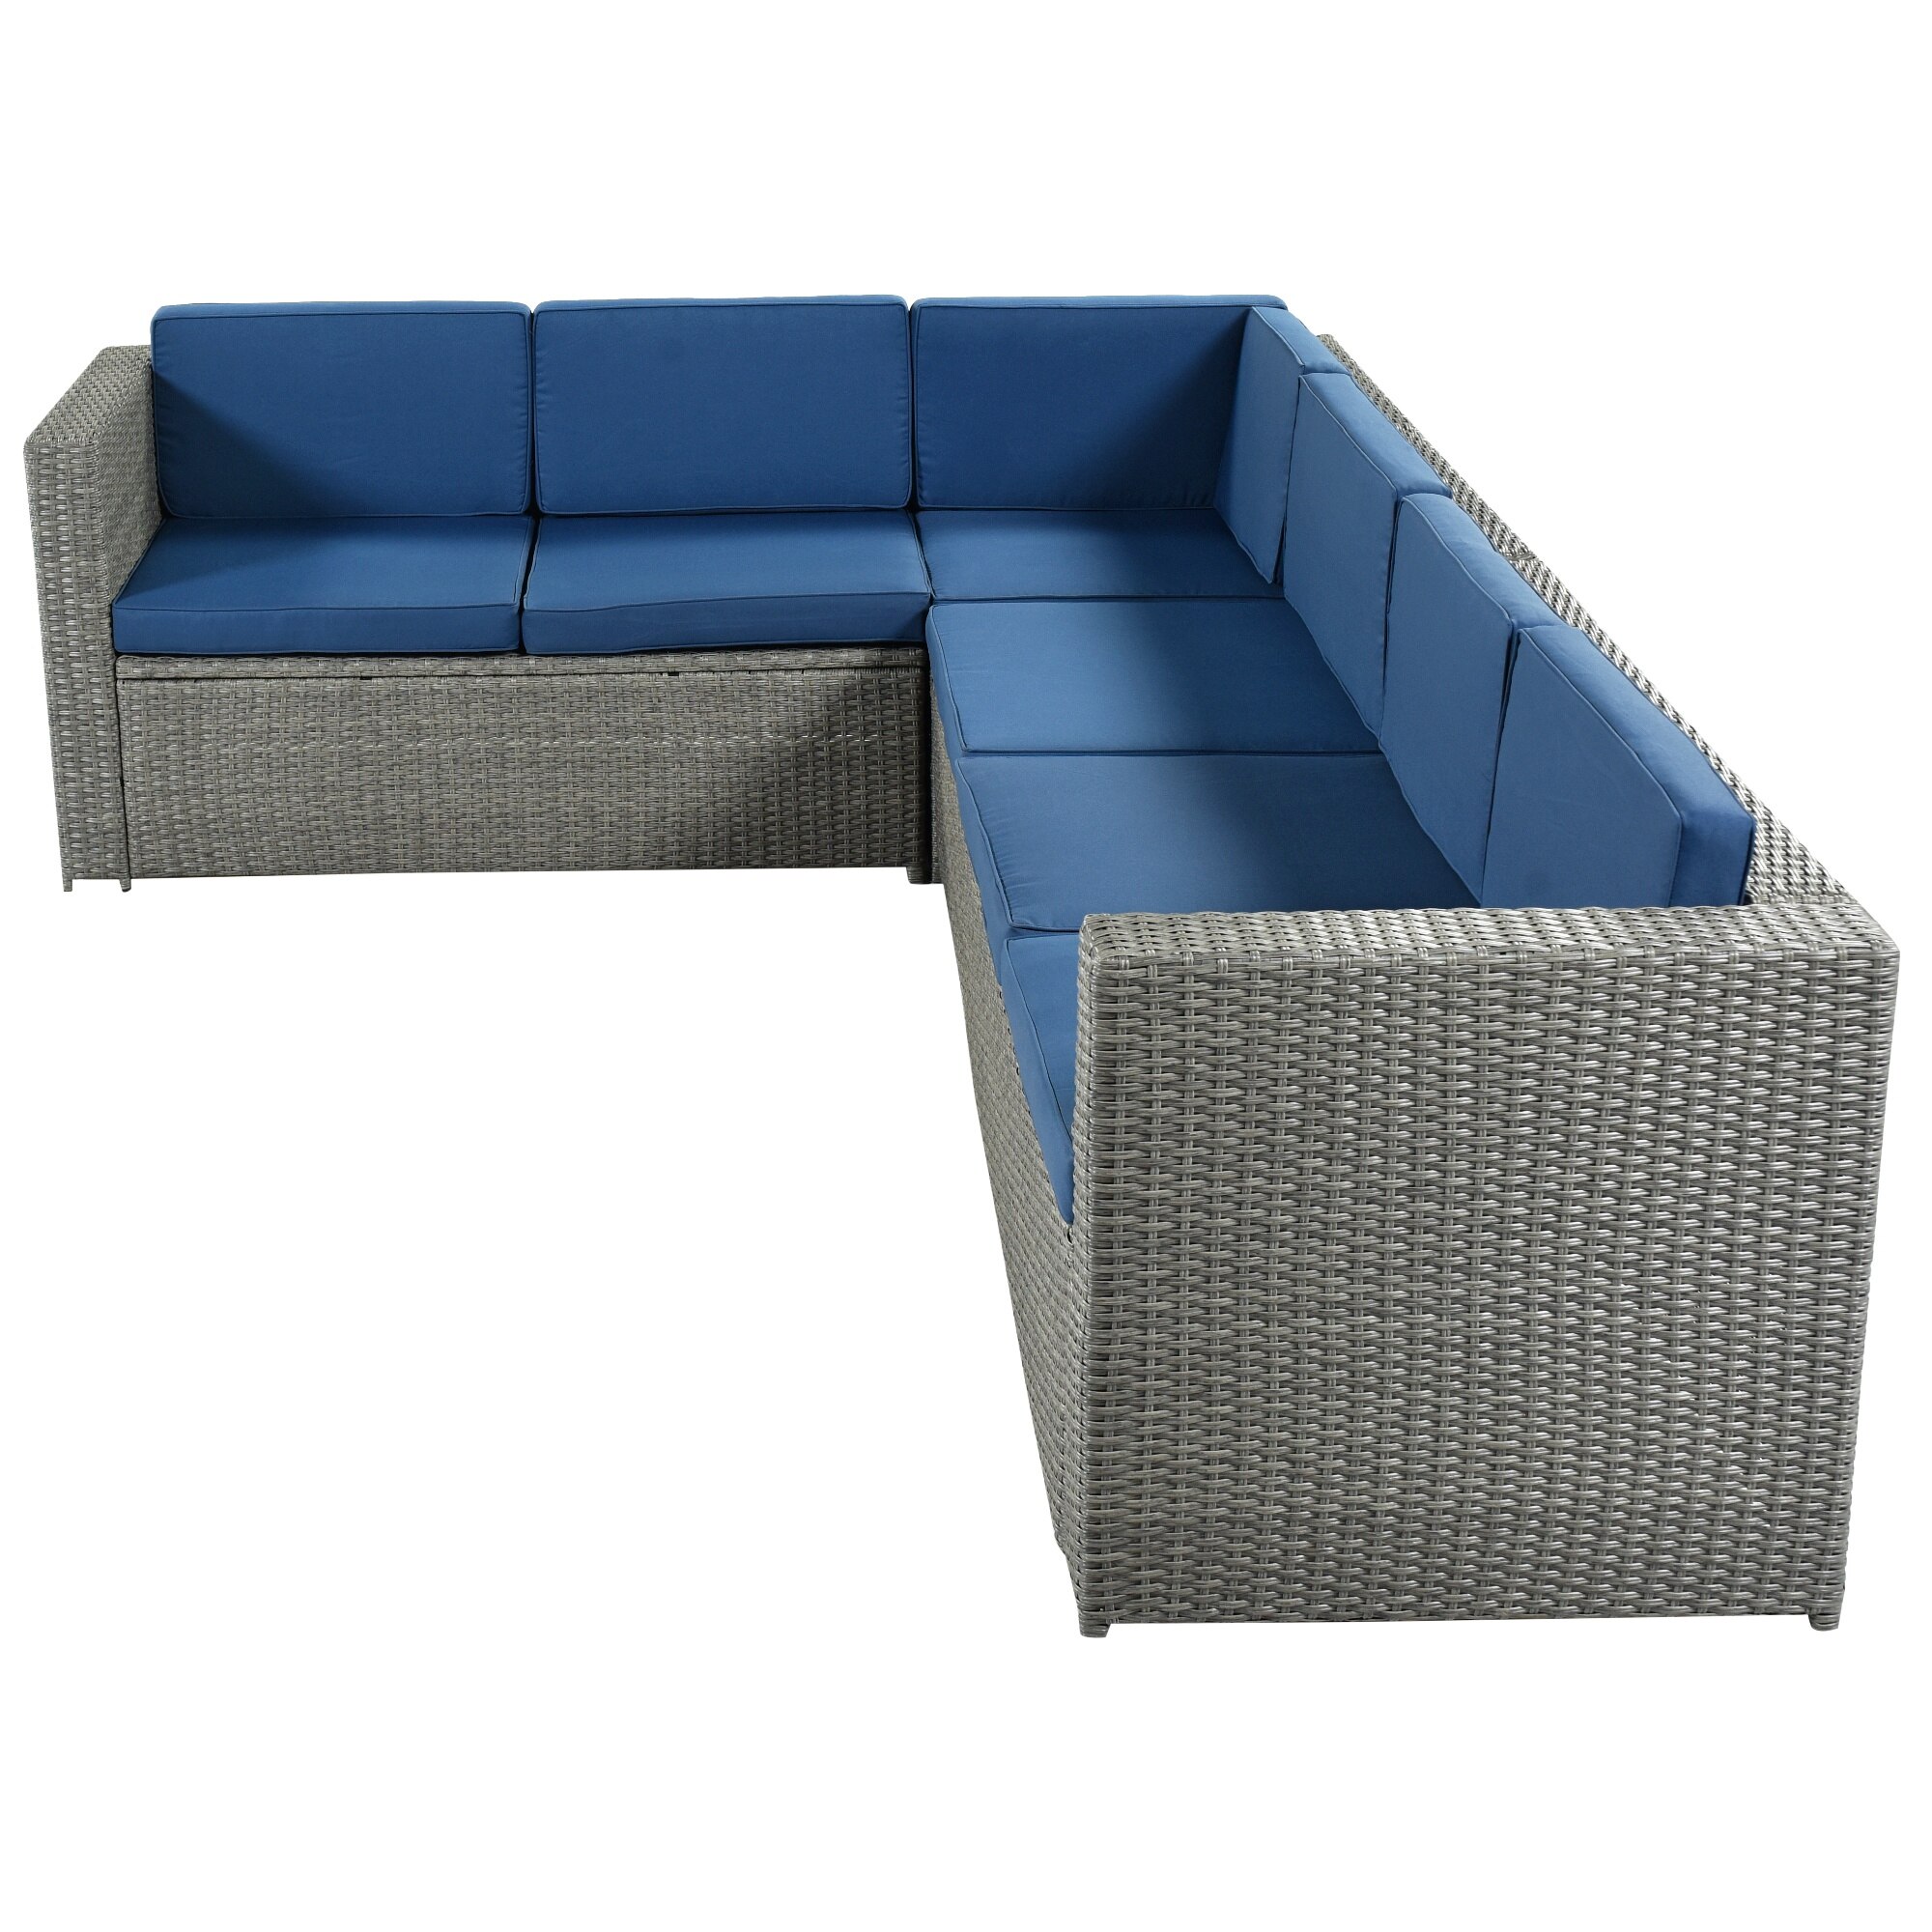 9 Piece Rattan Sectional Seating Group With Cushions And Ottoman Patio Furniture Sets Outdoor Wicker Sectional Garden Sofas 6